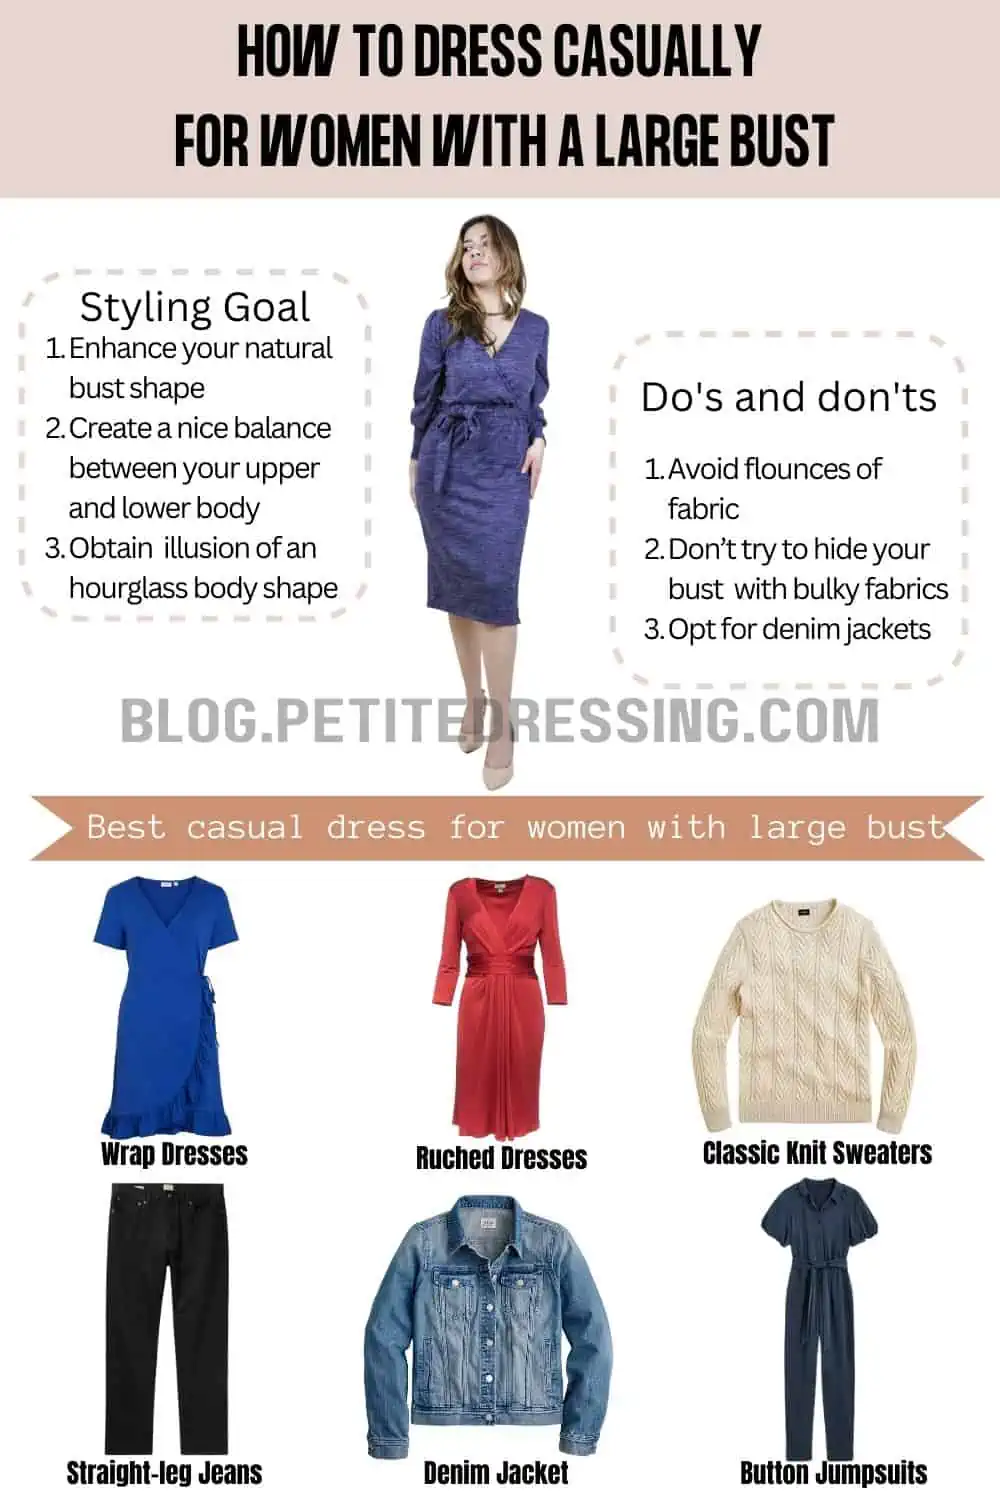 The Complete Tops Guide for Petites with Large Bust - Petite Dressing